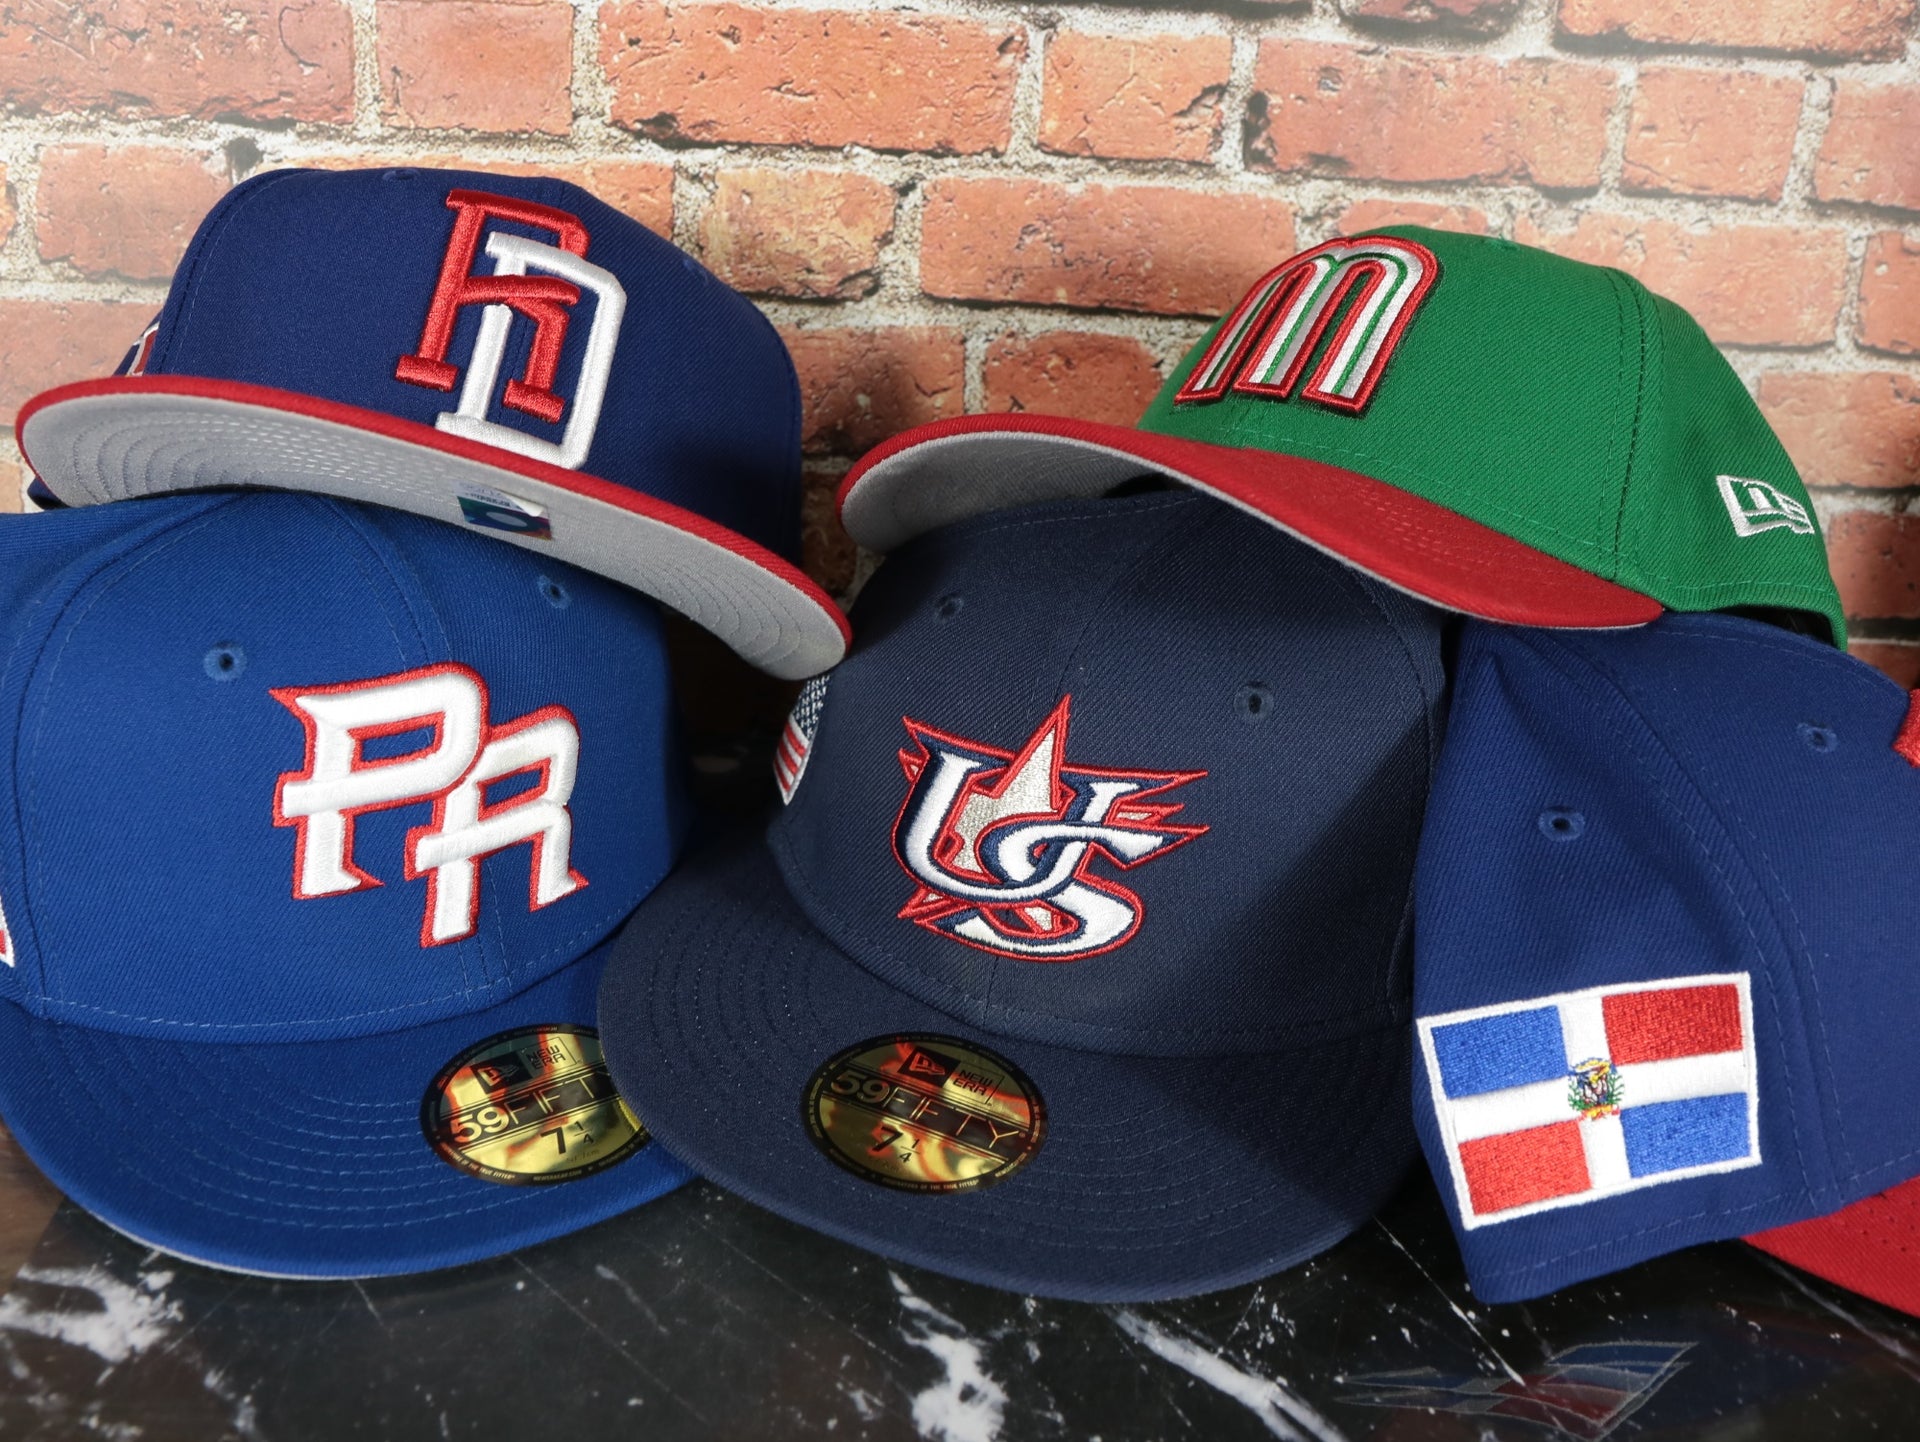 Cheer for your team with the 2023 World Baseball Classic Collection!